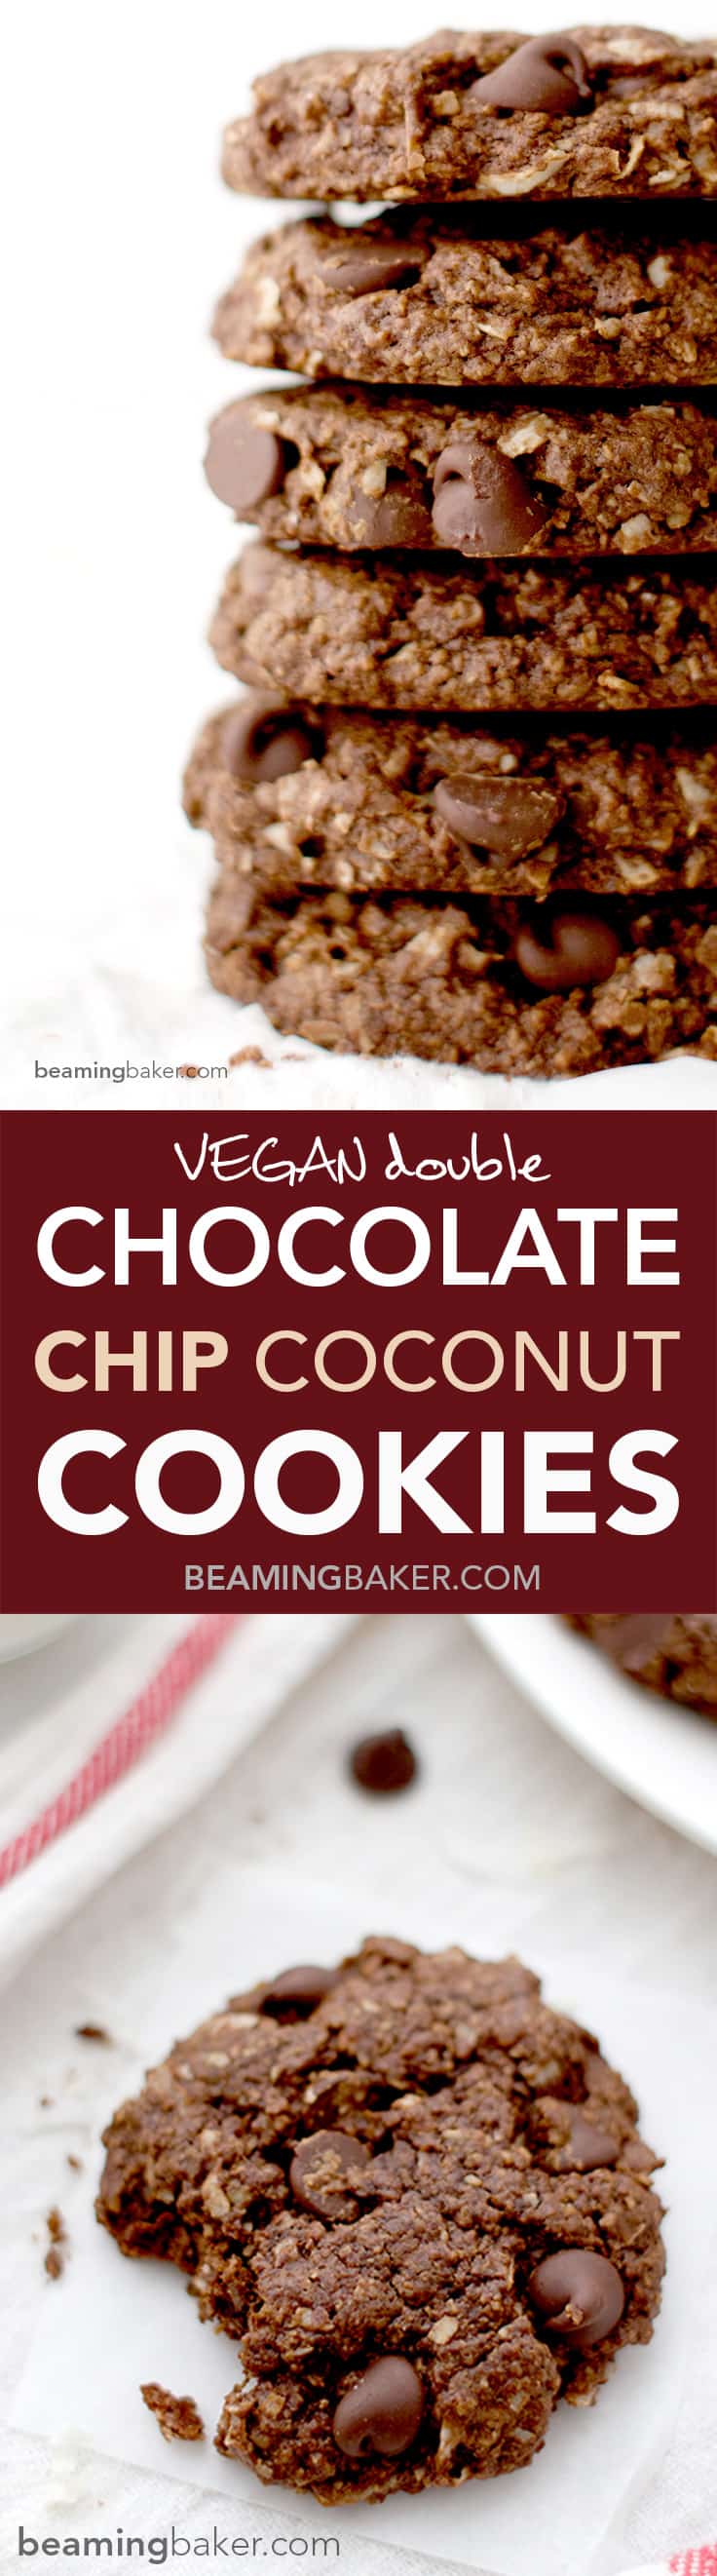 Rich, chewy & indulgent Double Chocolate Chip Coconut Cookies - a simple, vegan recipe for twice the chocolate plus coconut oil, coconut sugar and coconut shreds! #vegan beamingbaker.com